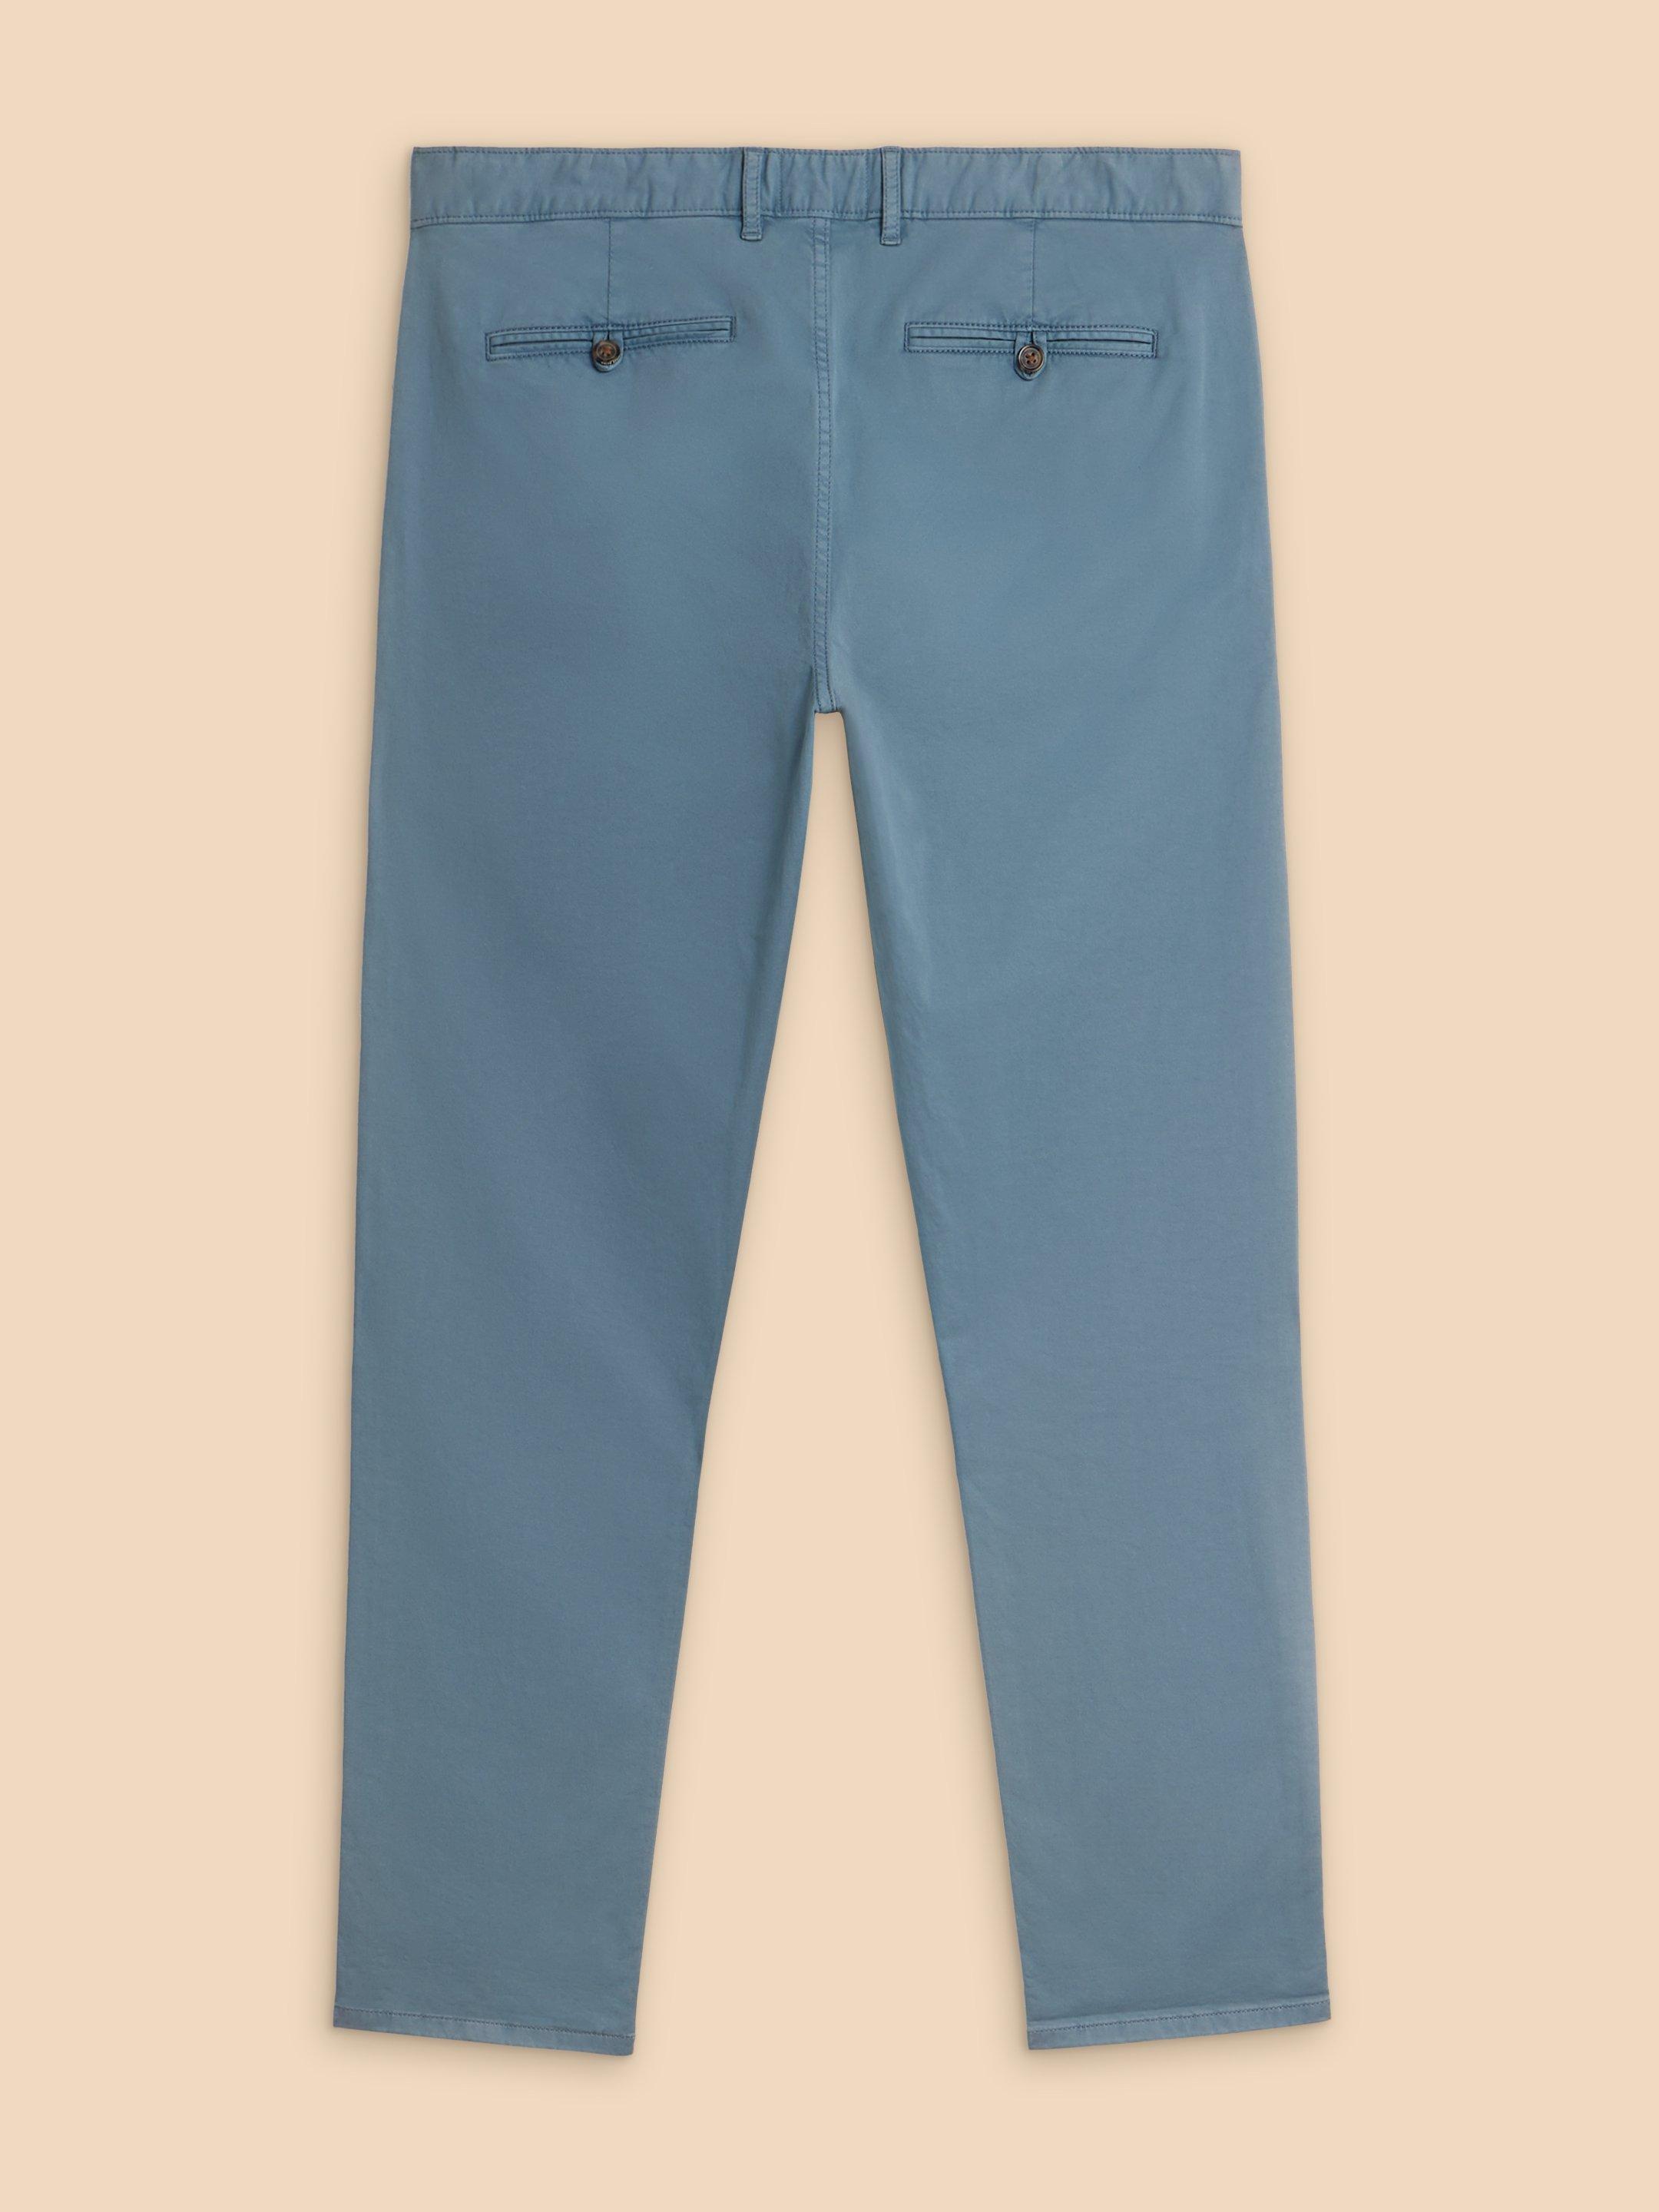 Sutton Organic Chino Trouser in MID BLUE - FLAT BACK